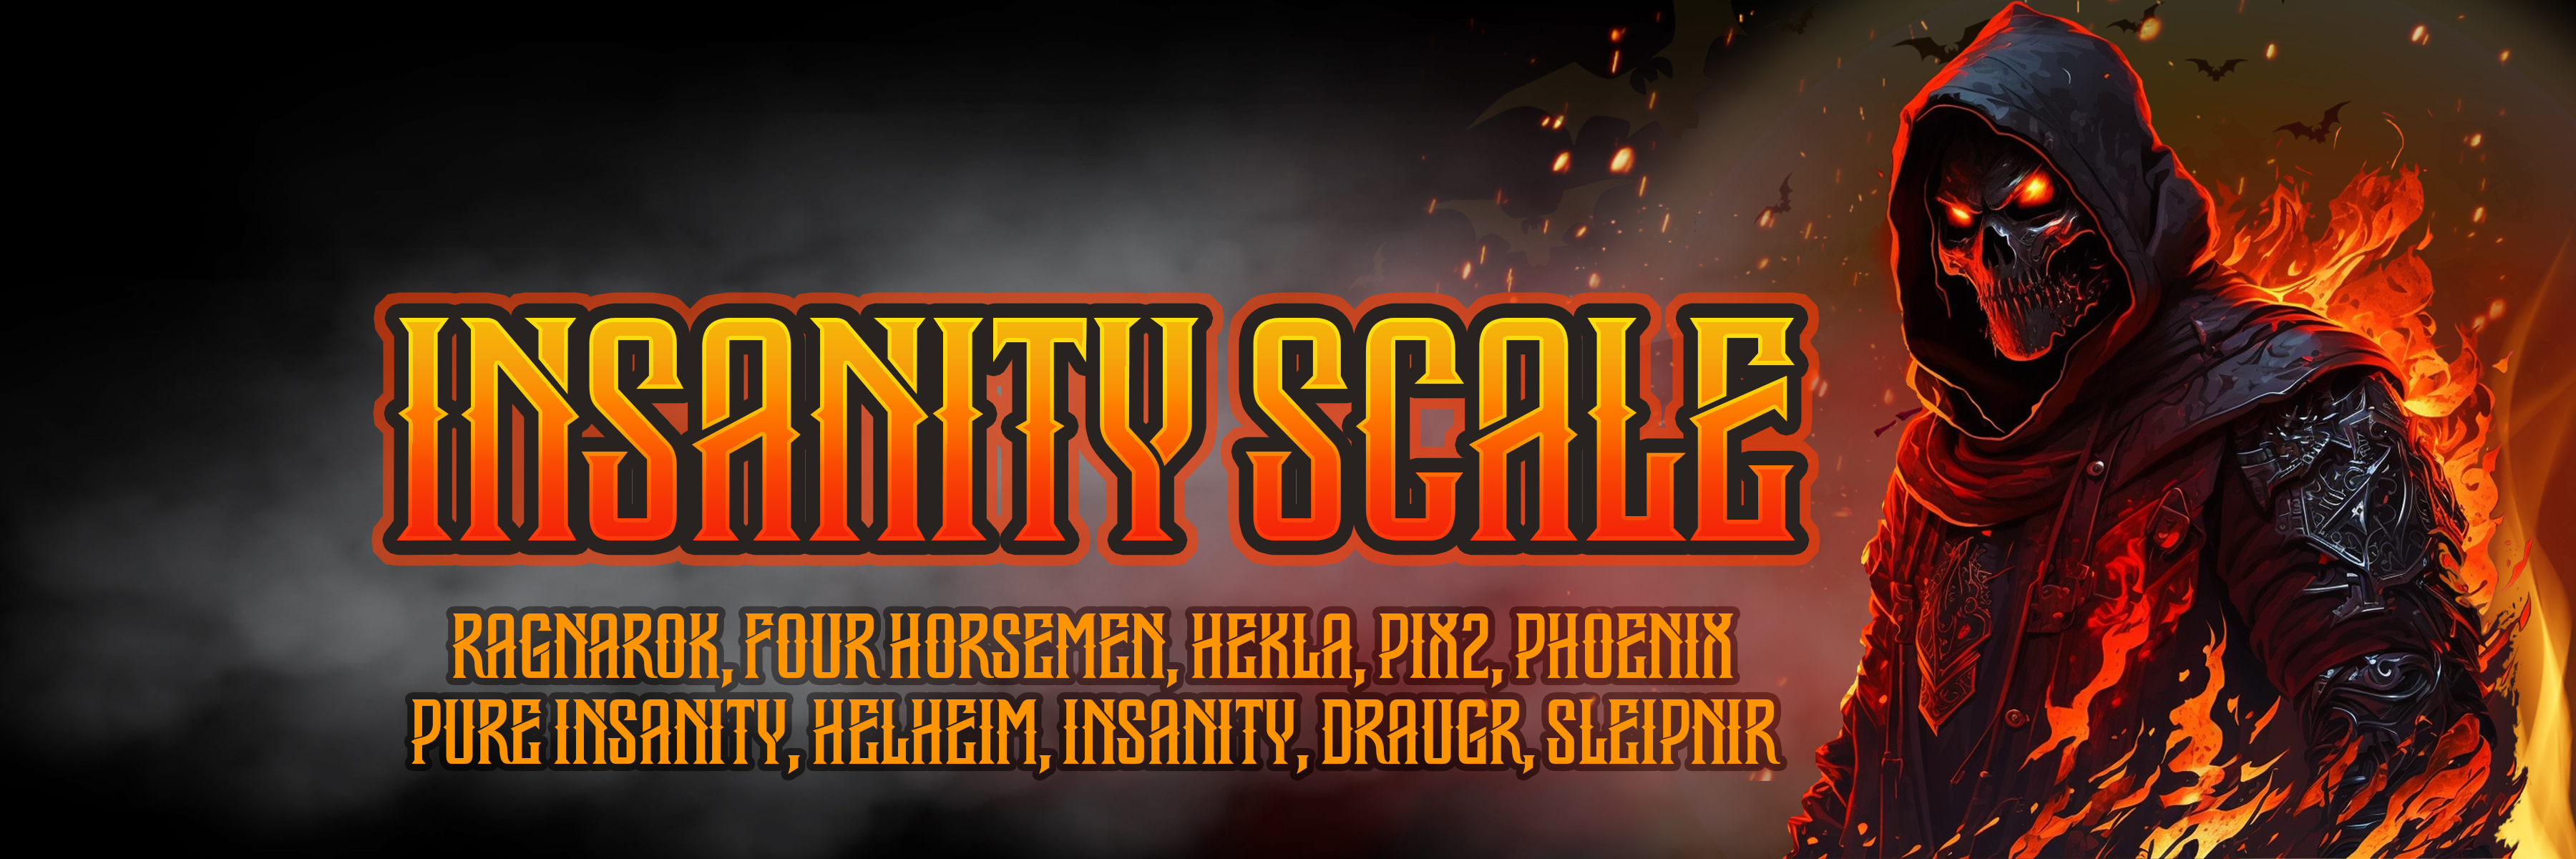 Insanity Scale